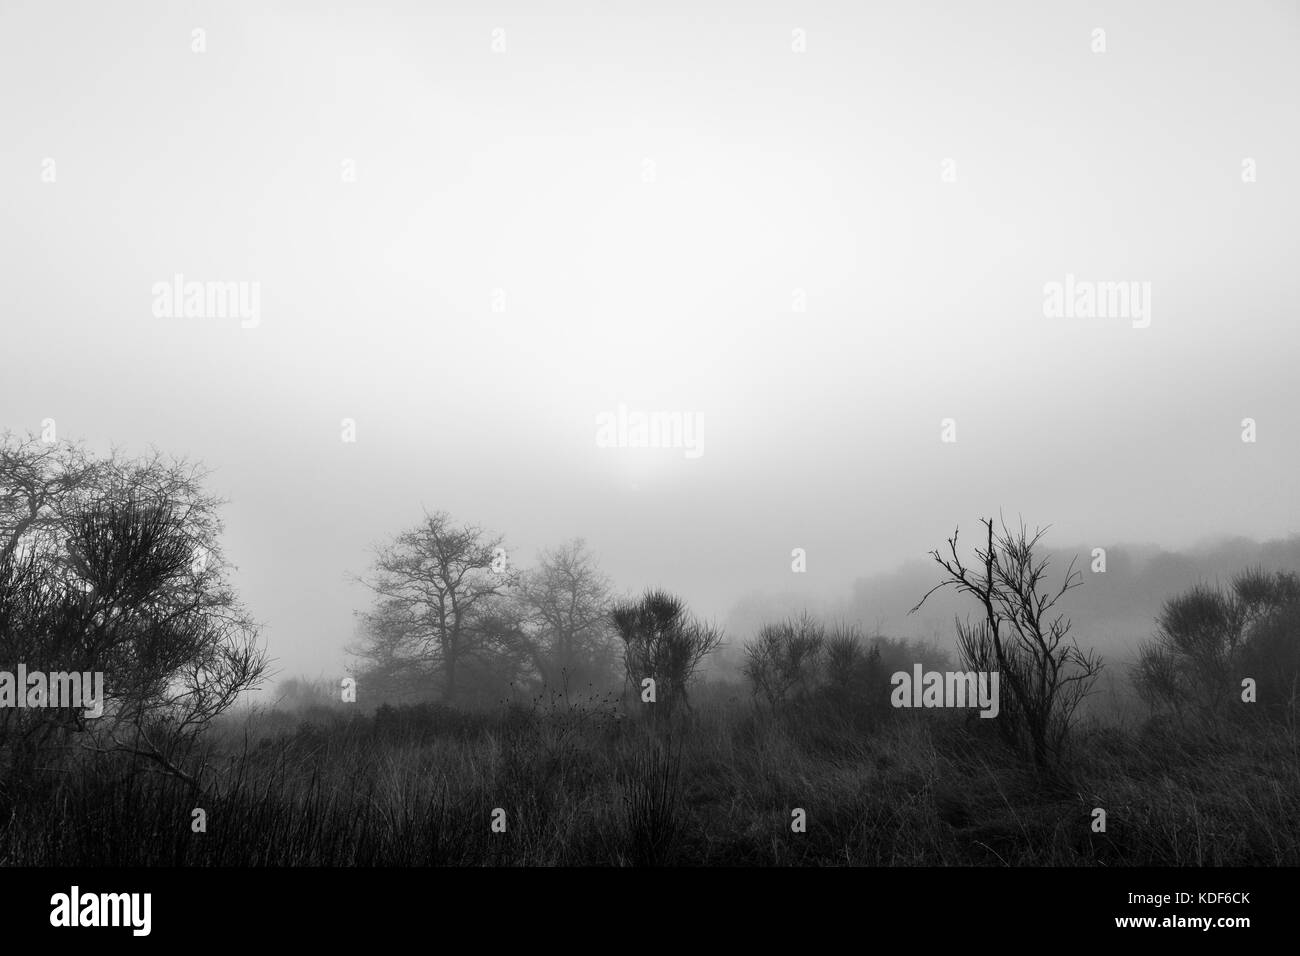 Some trees and plants in the midst of low fog, with a sunrise just above Stock Photo